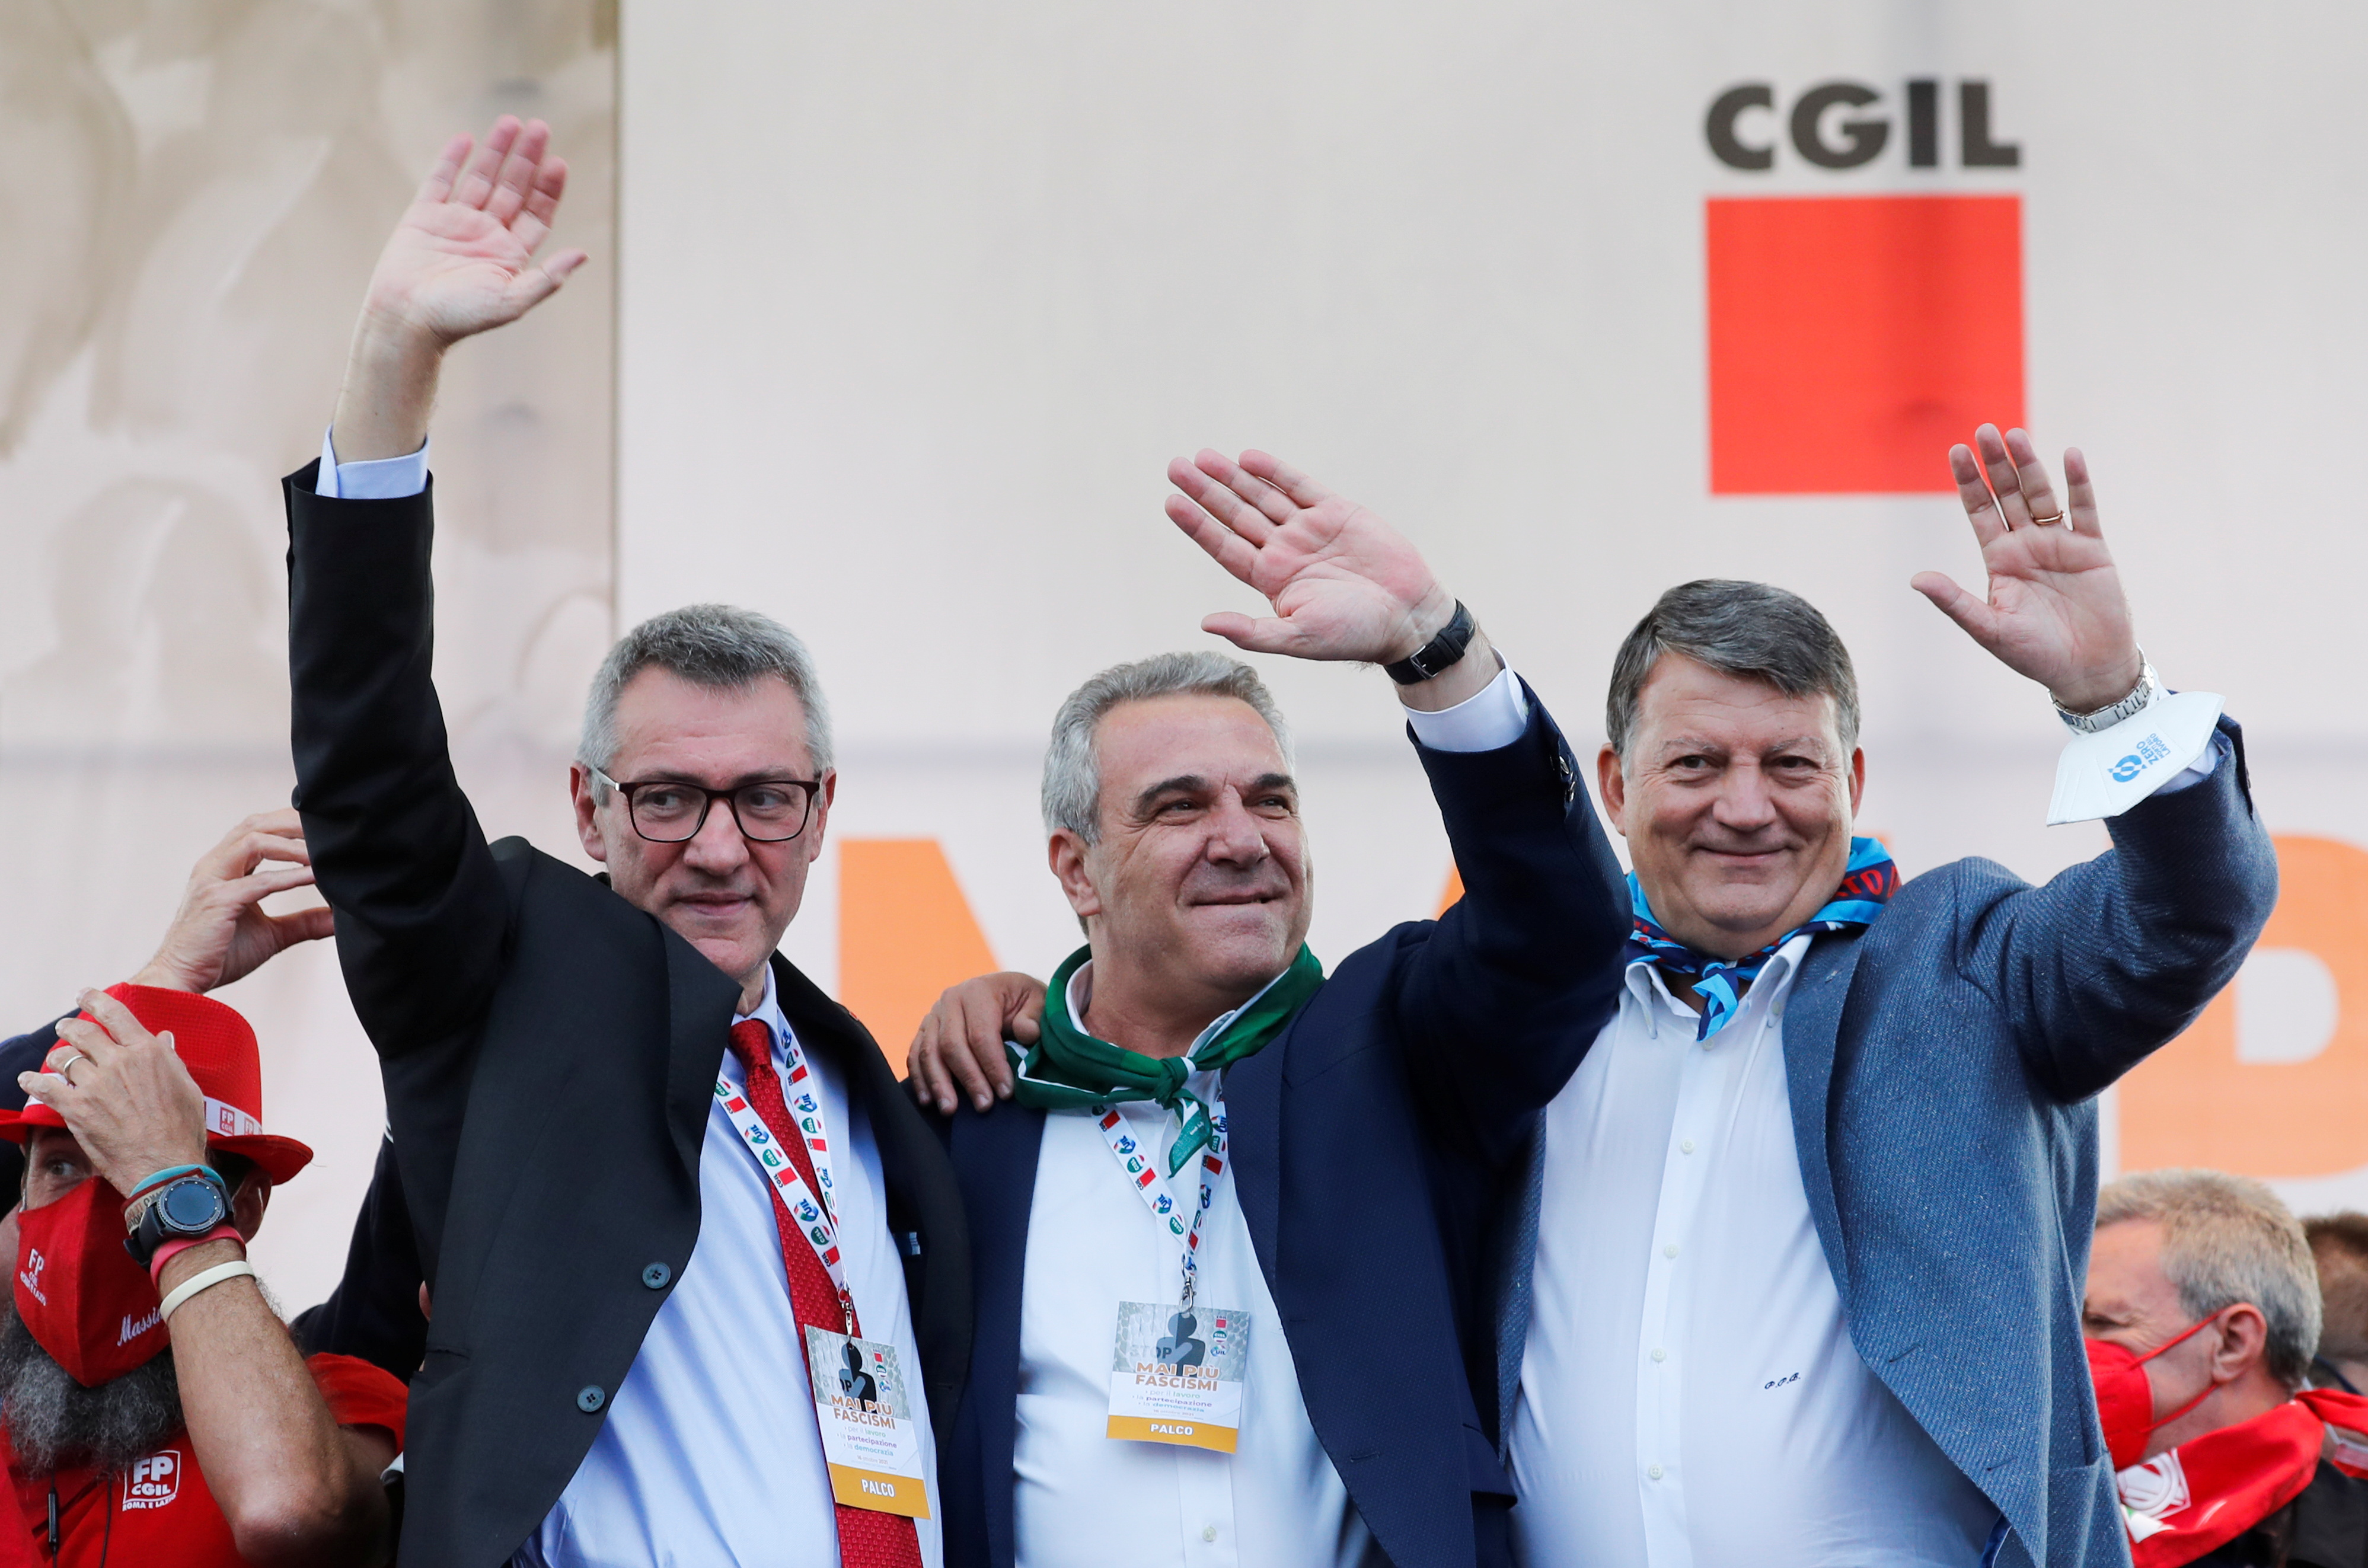 Union leaders Maurizio Landini, Luigi Sbarra and Pierpaolo Bombardieri wave during a protest against fascism a week after anti-vaccine riots by protesters including members of the far-right party Forza Nuova, in Rome, Italy, October 16, 2021. REUTERS/Remo Casilli